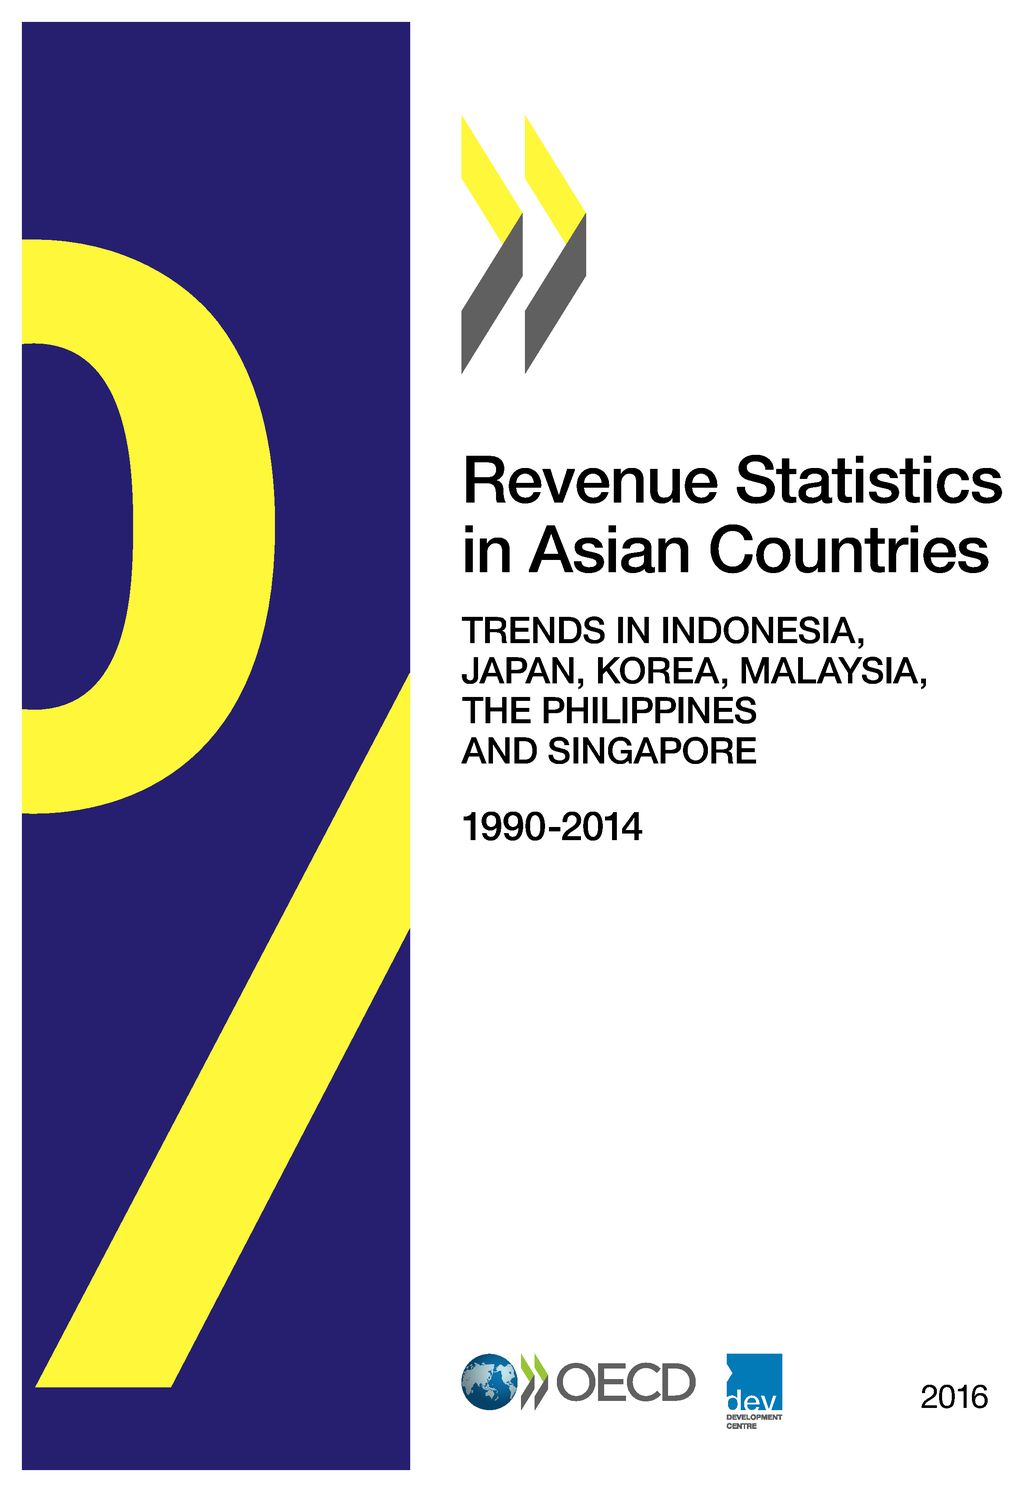 Revenue statistics in Asian countries, 1990-2014 : trends in Indonesia, Japan, Korea, Malaysia, the Philippines and Singapore 책표지